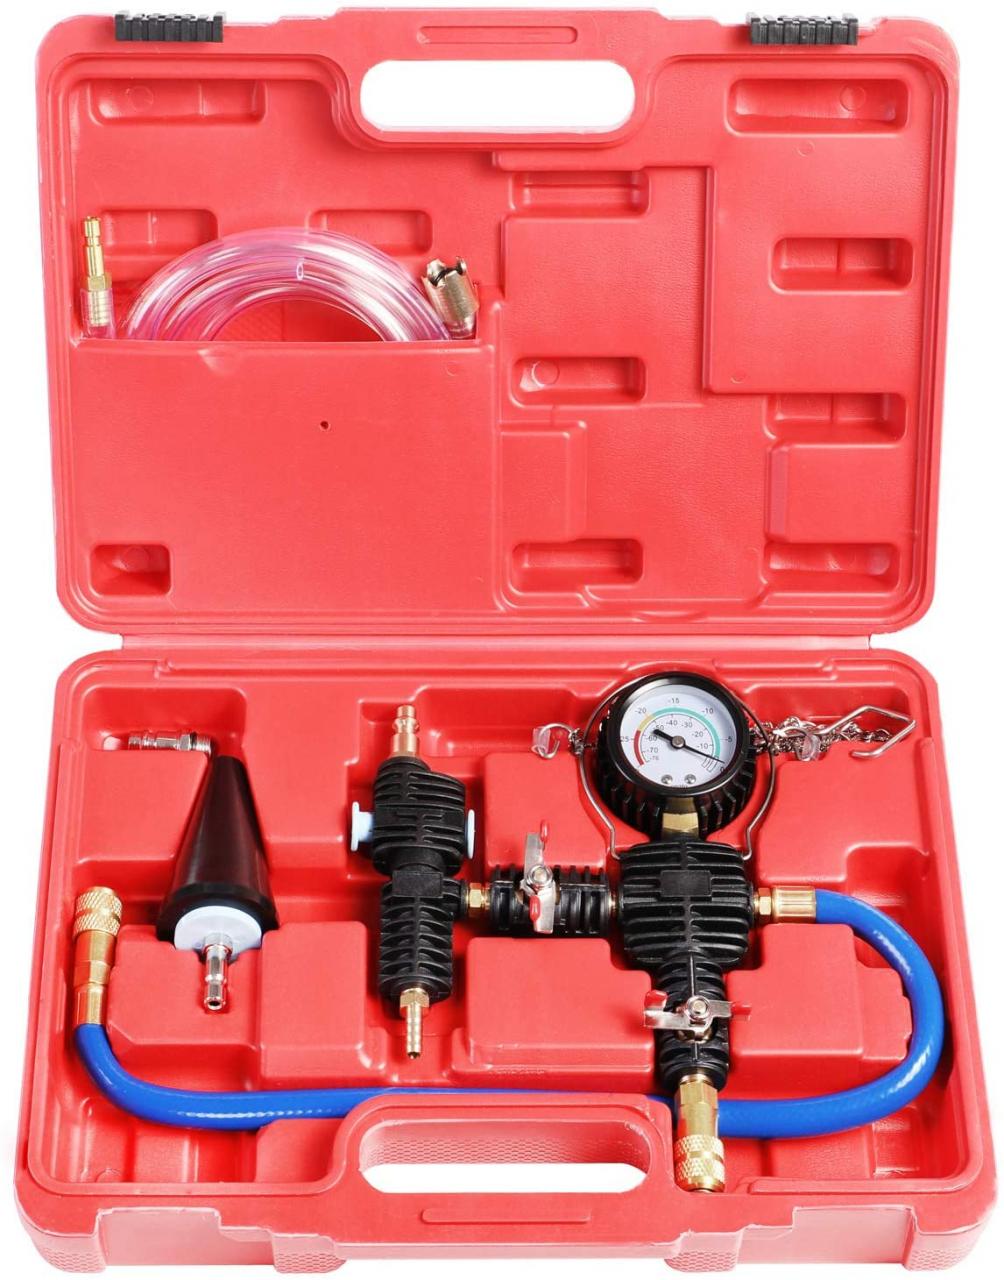 UView Airlift Cooling System Leak Checker and Airlock Purge Tool Kit |  #1857498785